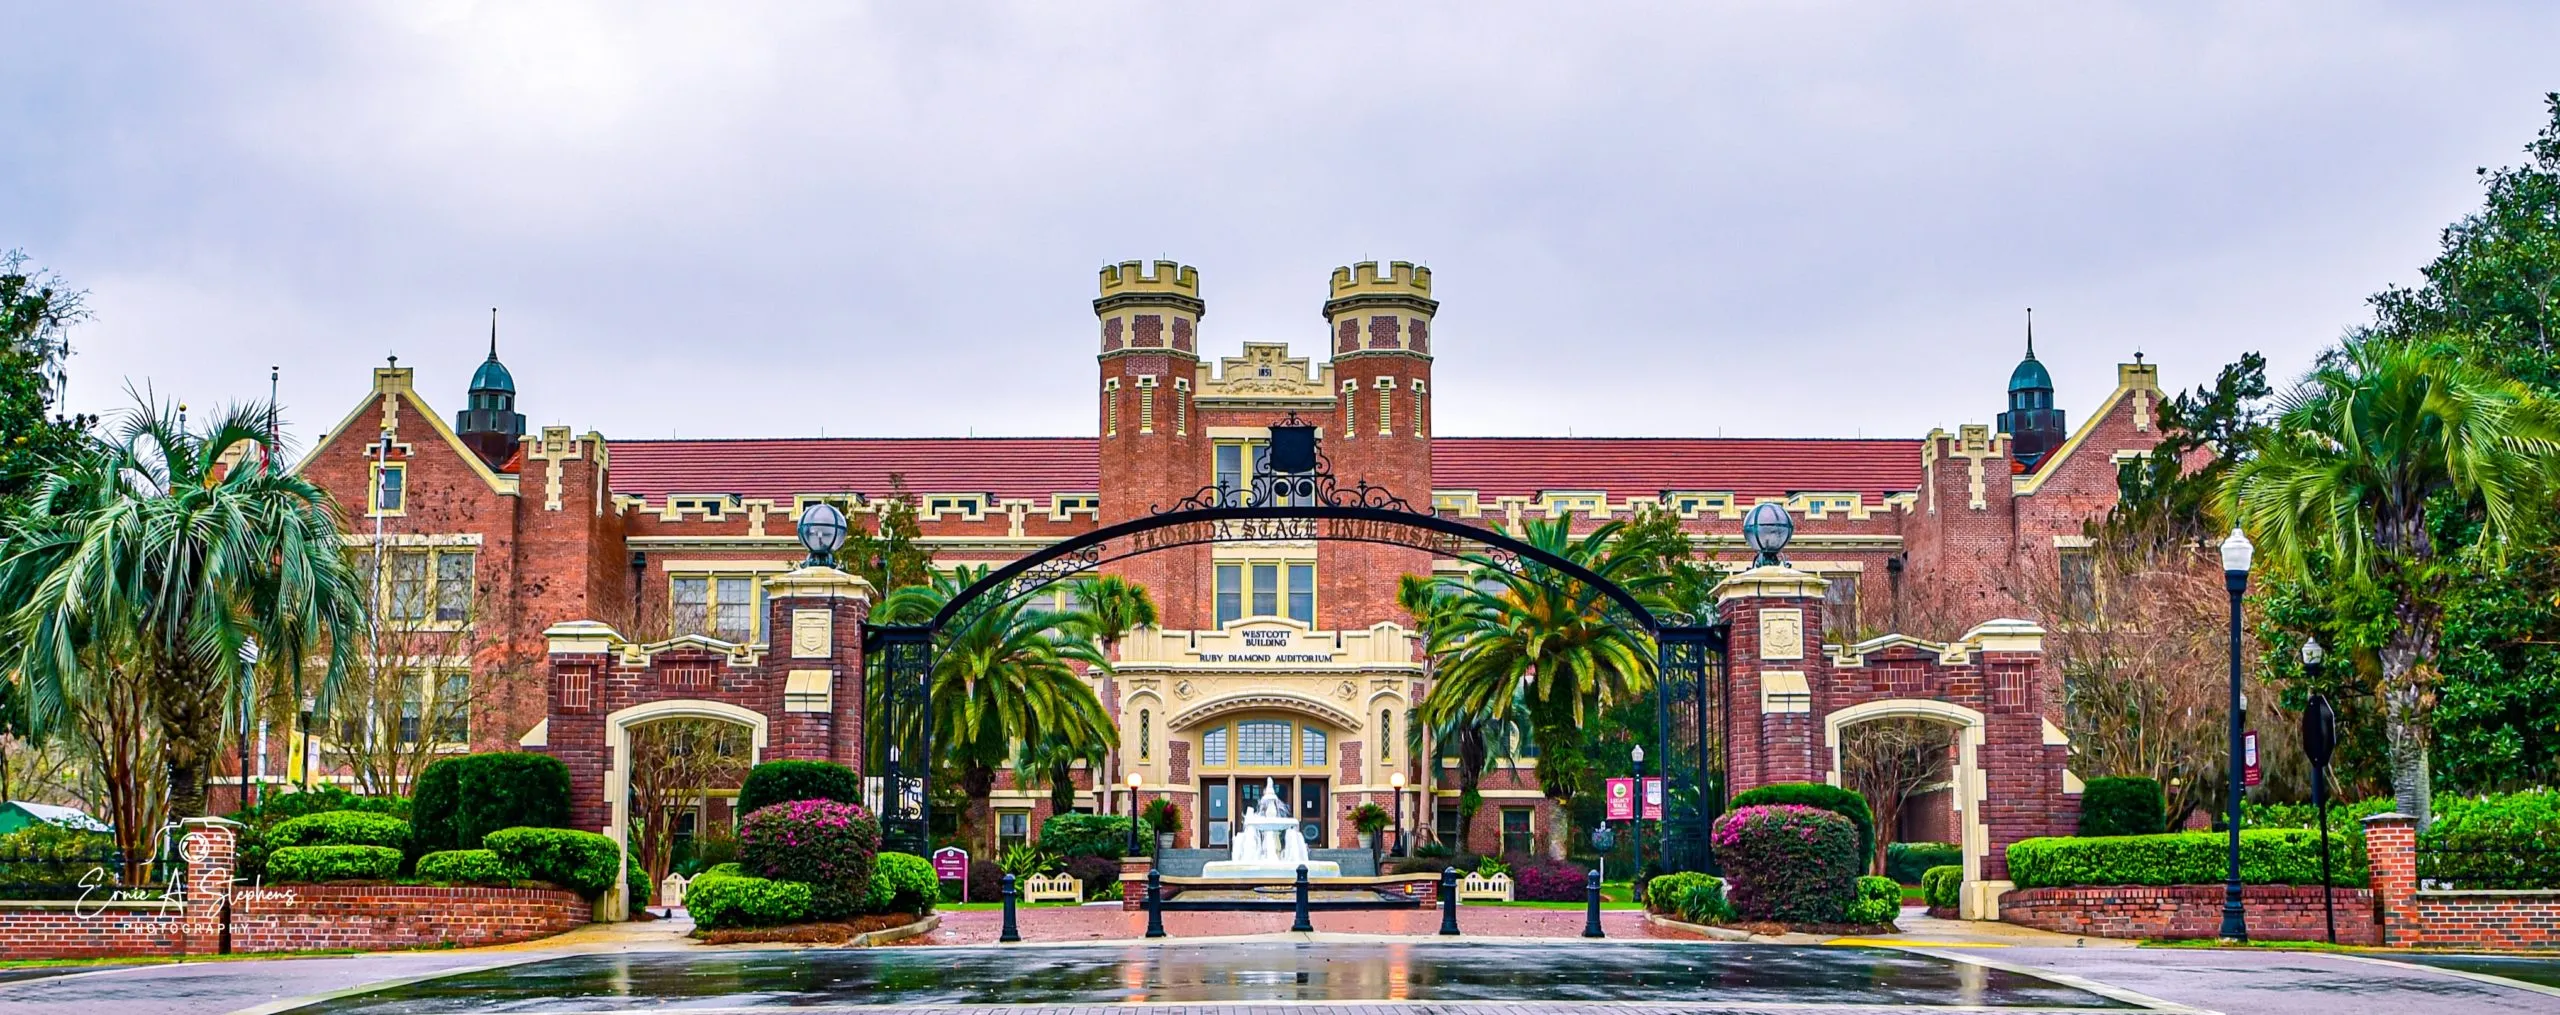 Florida State University: A Leading Public Research University in Florida